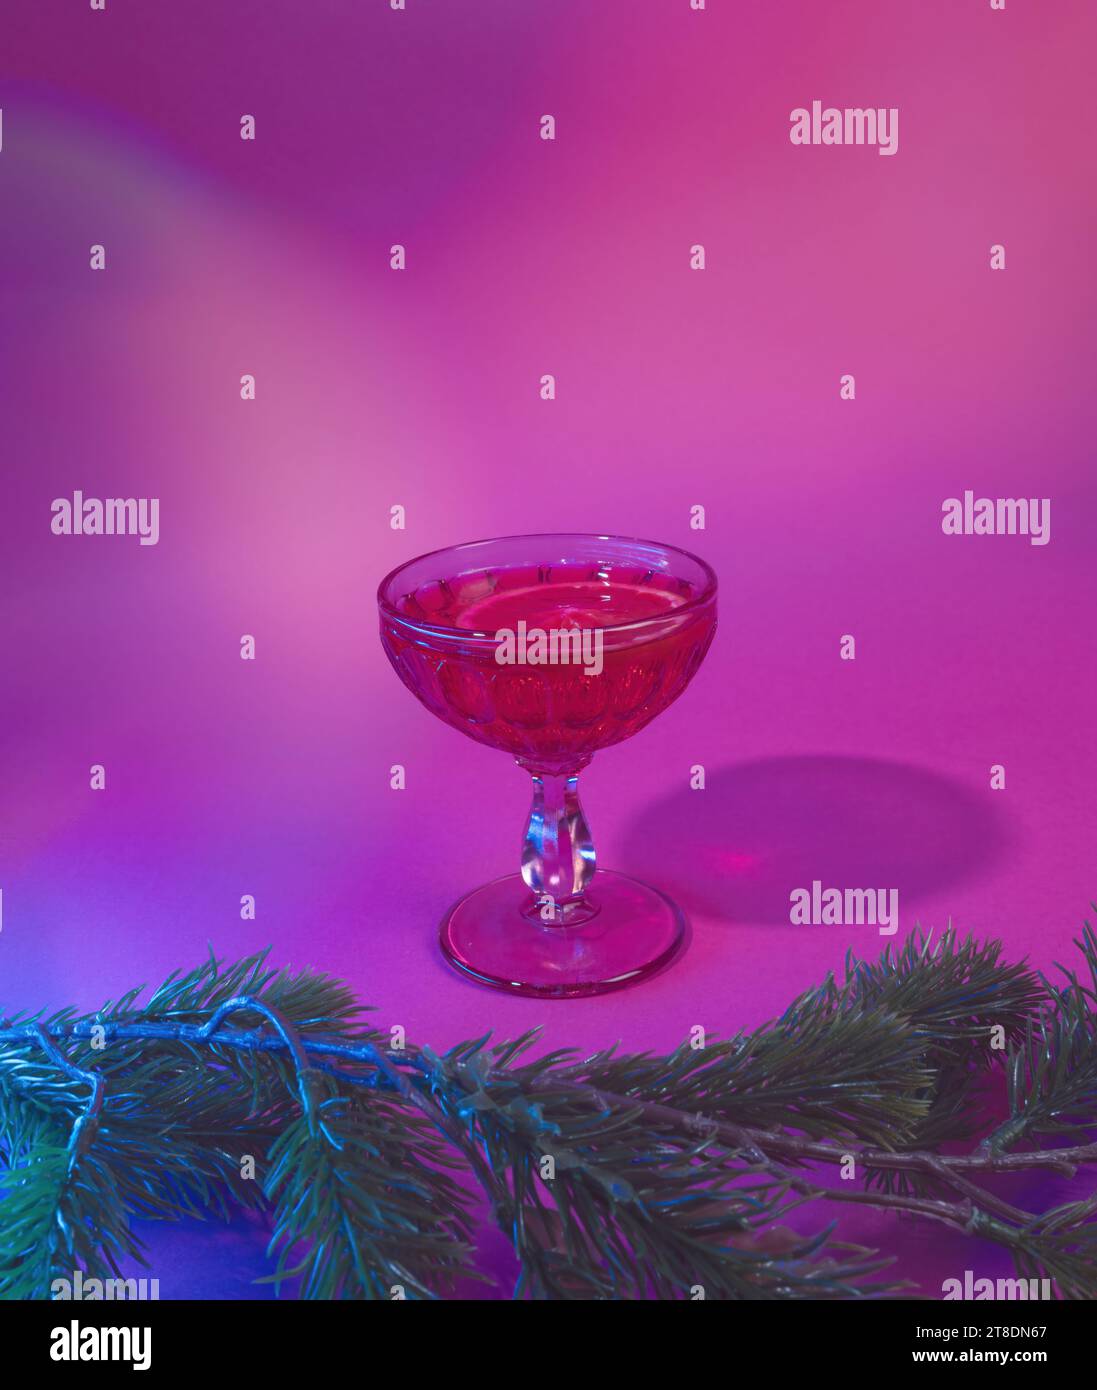 Seasonal Toast with a Pop of Color - Festive Drink in Elegant Glassware Against a Lively Purple Scene Stock Photo